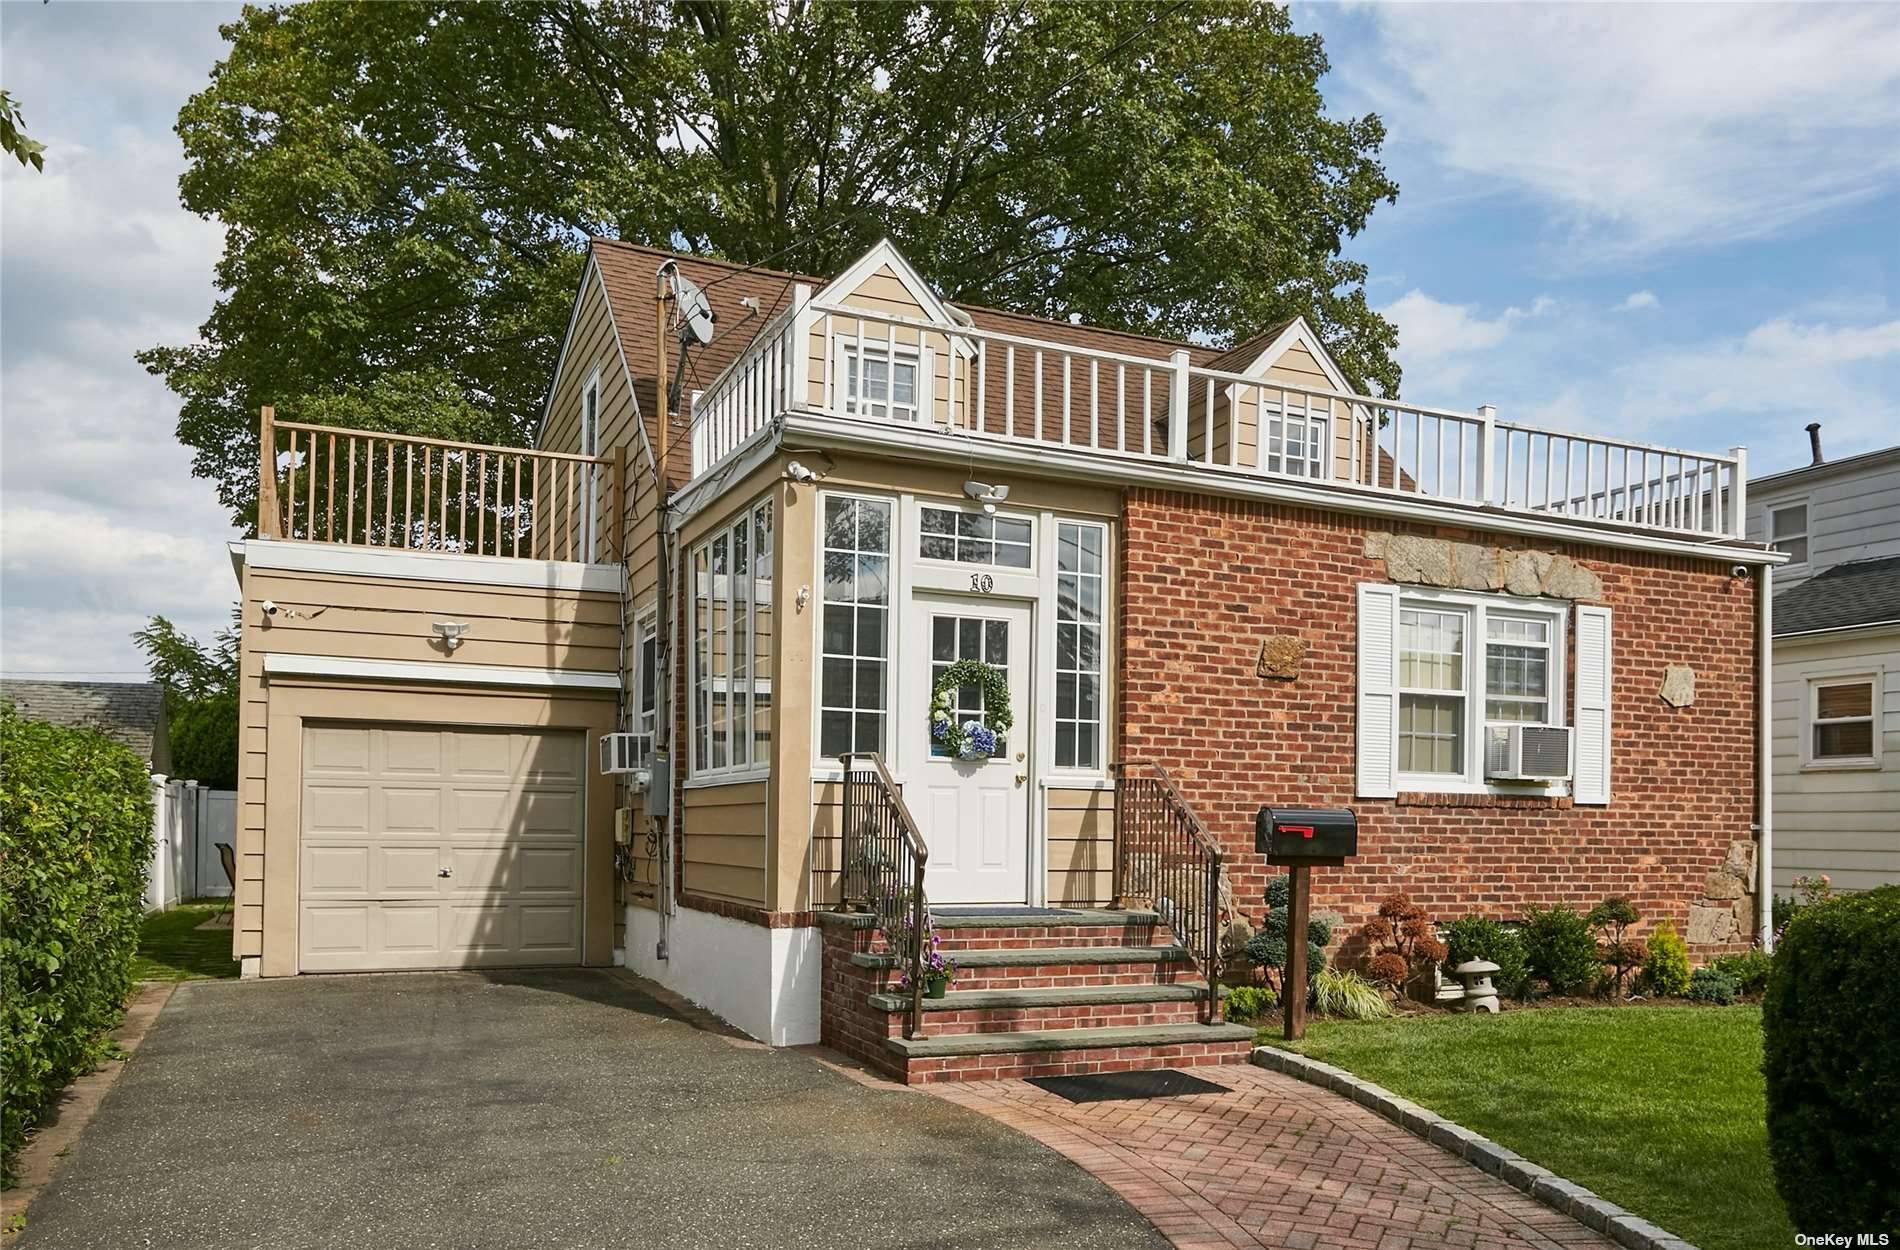 Welcome to this beautiful home located in Lynbrook.